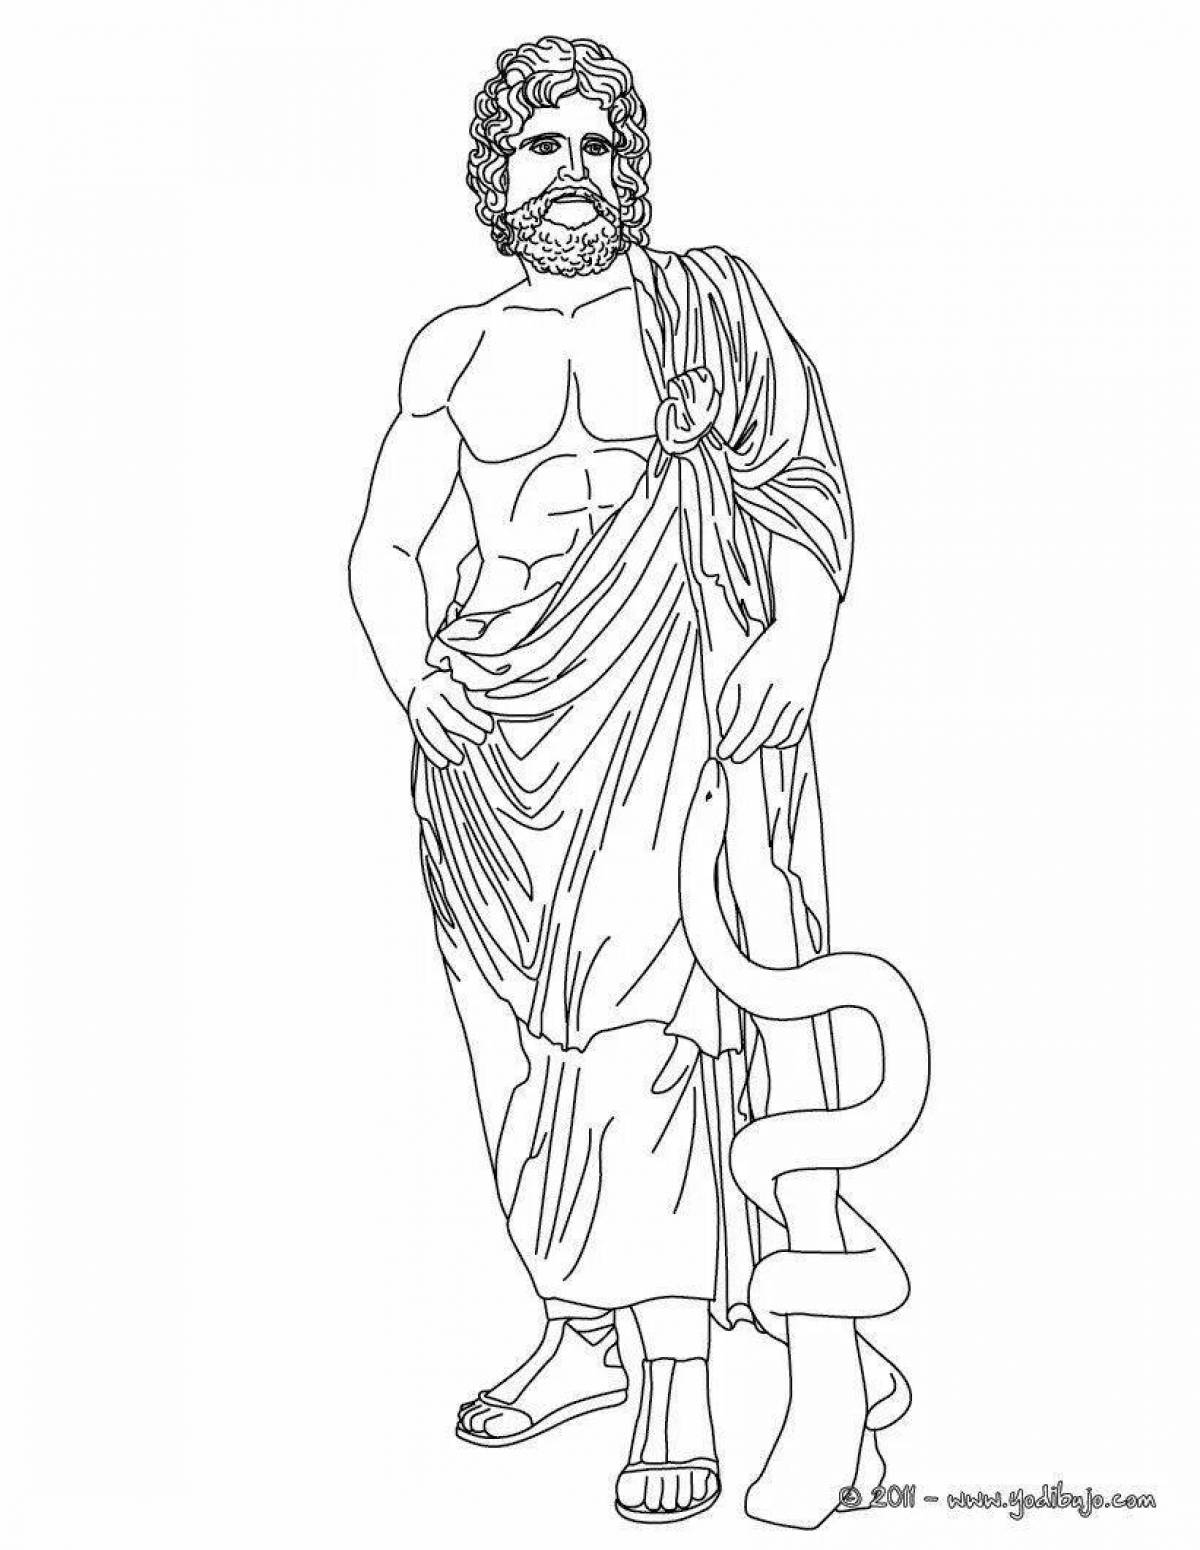 Exalted Greek gods coloring book